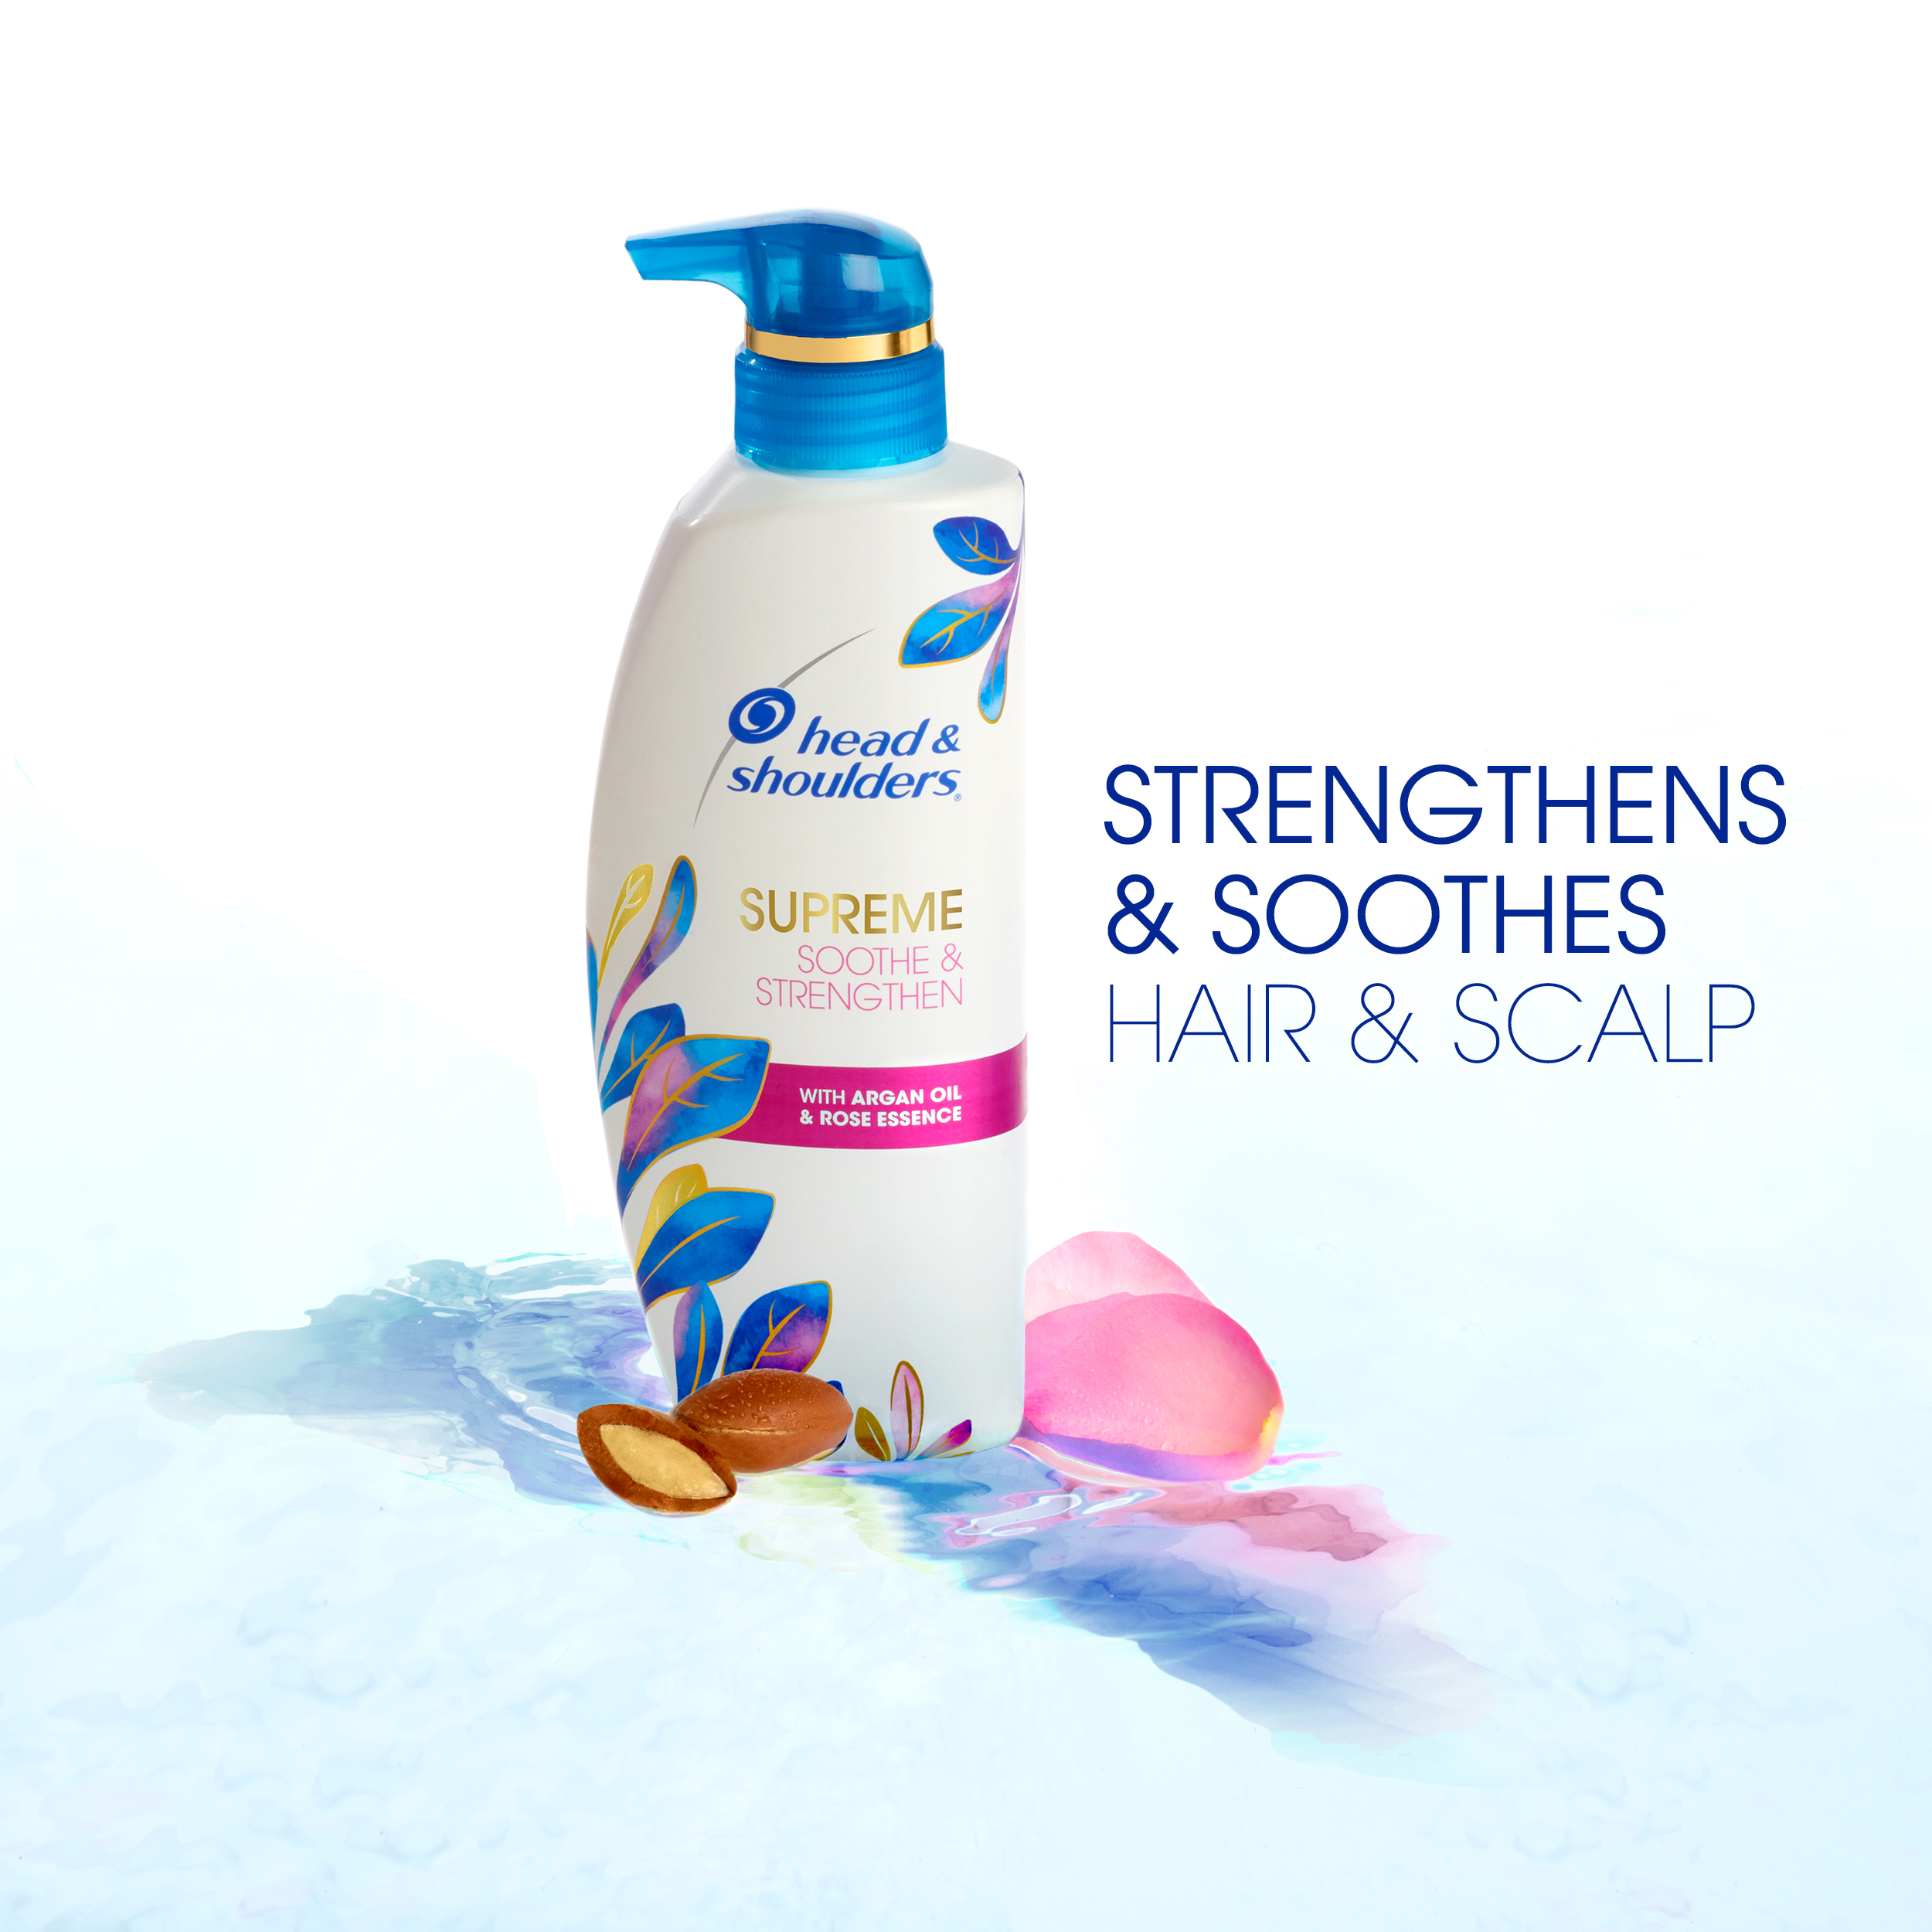 Head & Shoulders Supreme Moisturizing Soothe and Strengthen Dandruff Relief Daily Shampoo, 11.8 fl oz - image 5 of 9